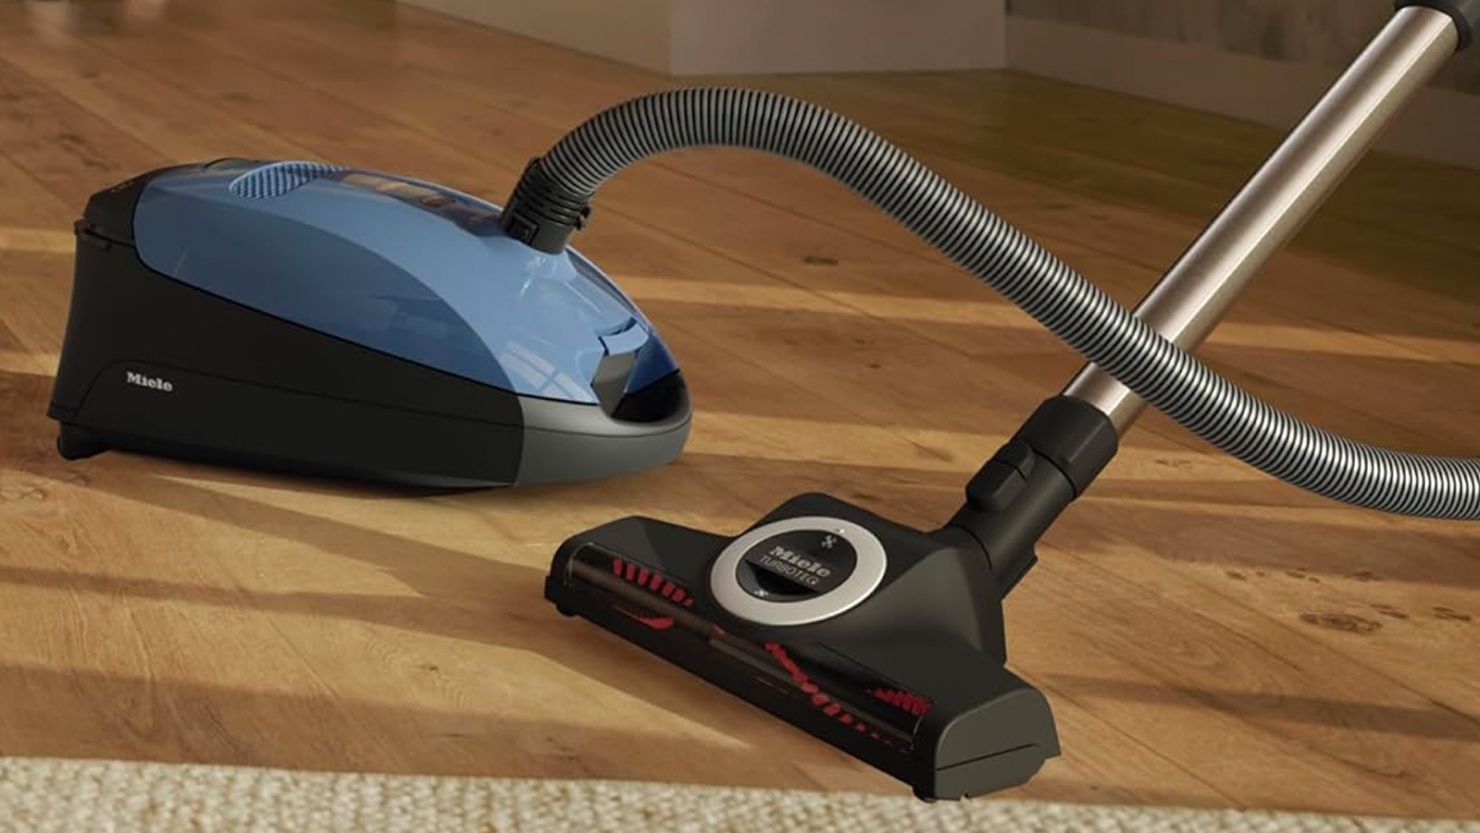 Miele's Classic C1 Turbo Team Bagged Canister Vacuum is 20% off